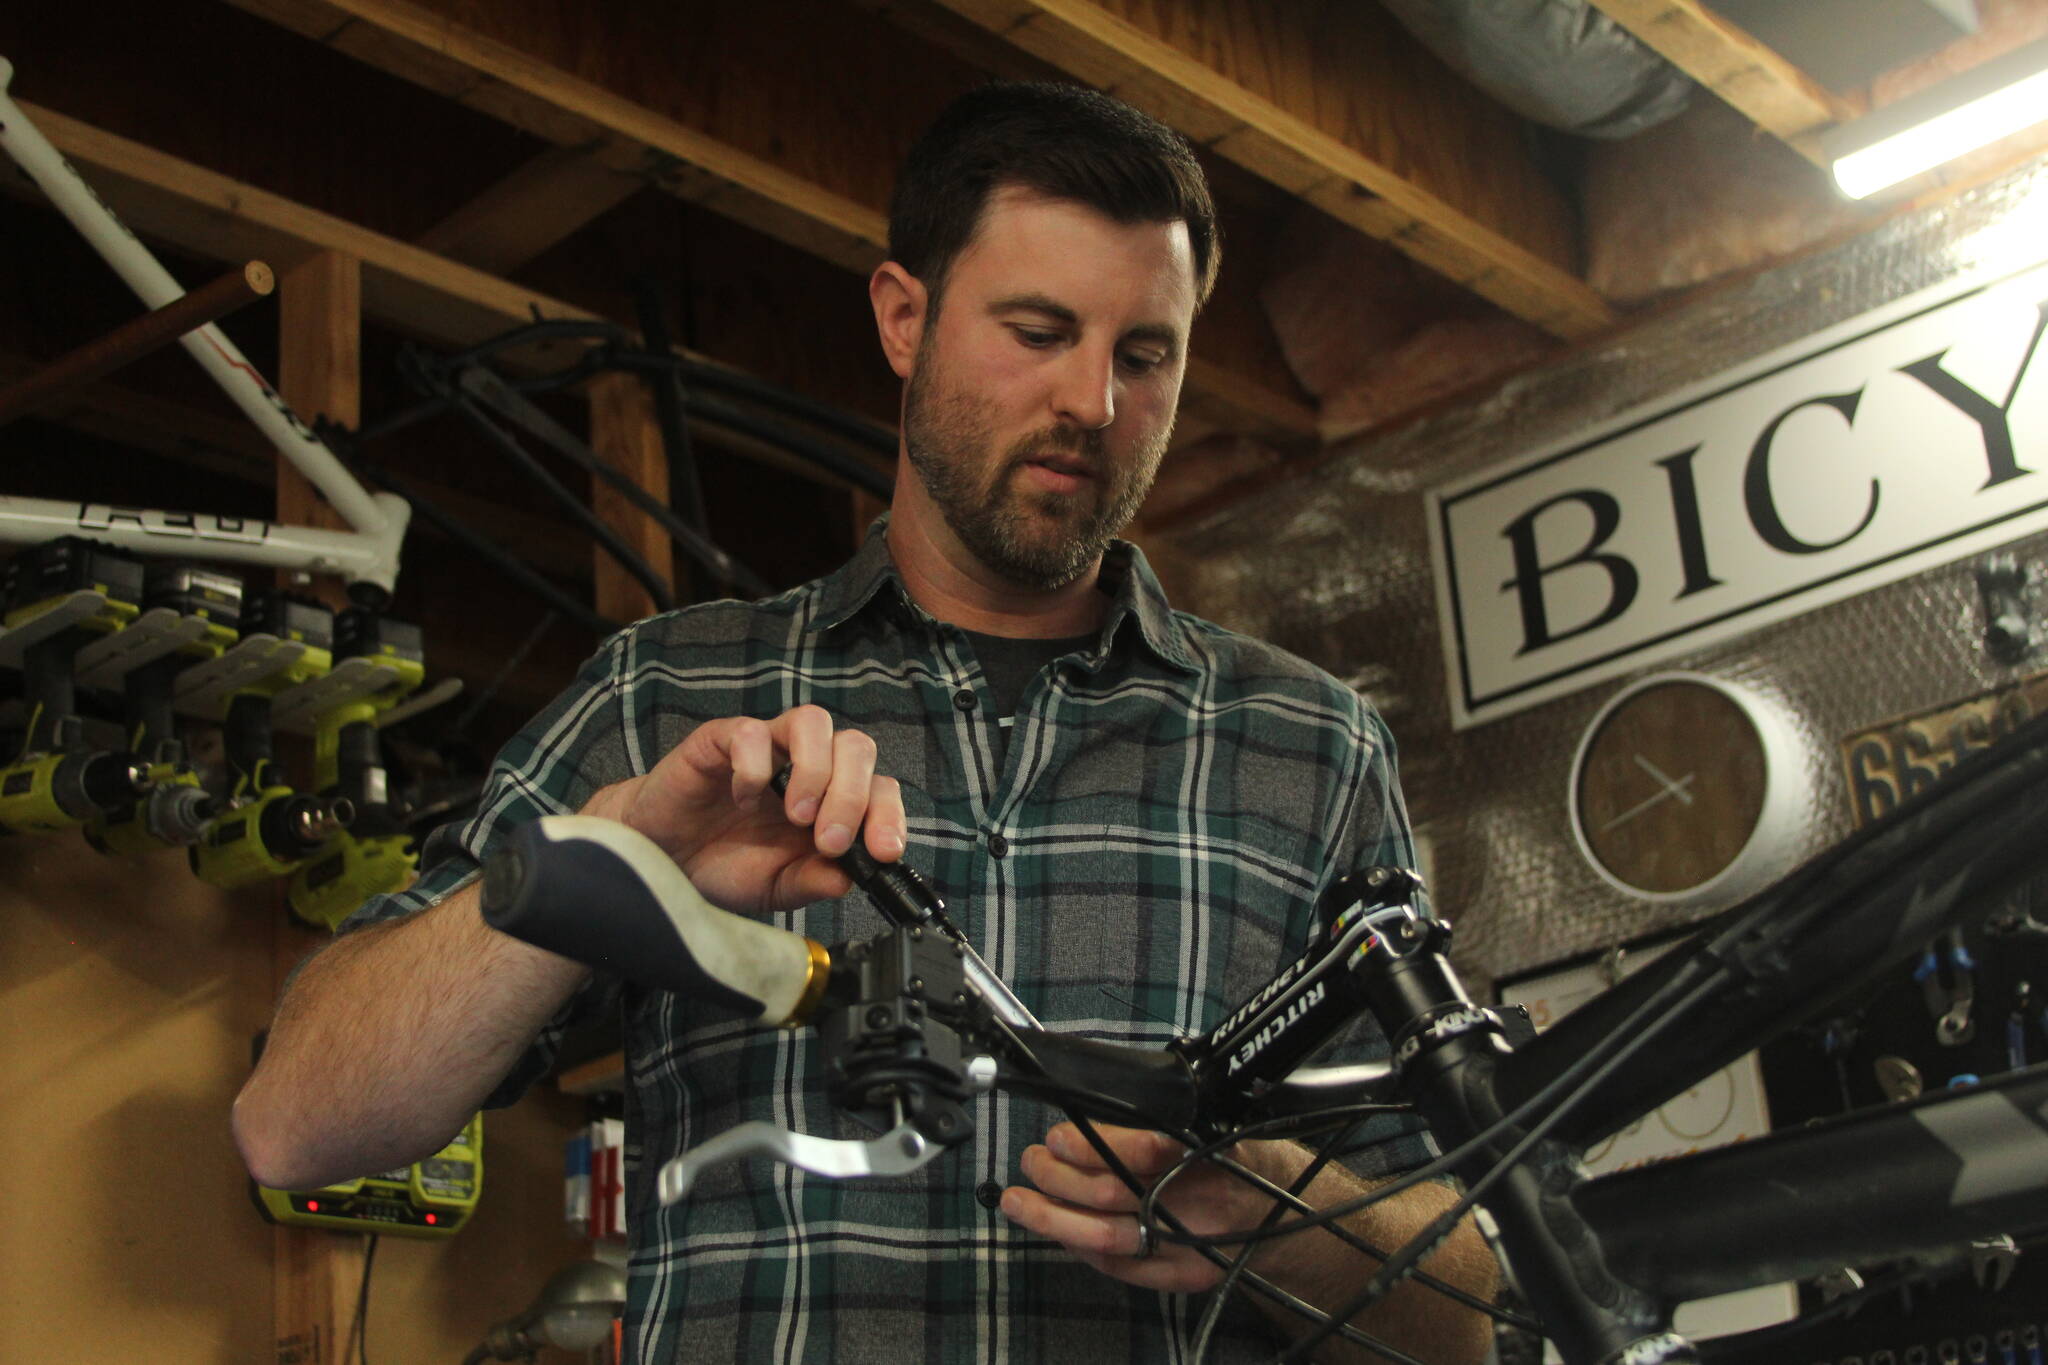 Photo by Karina Andrew/Whidbey News-Times
Trevor Stevens, owner of Celerity Cycles, fixes a bicycle in his home shop in Coupeville.